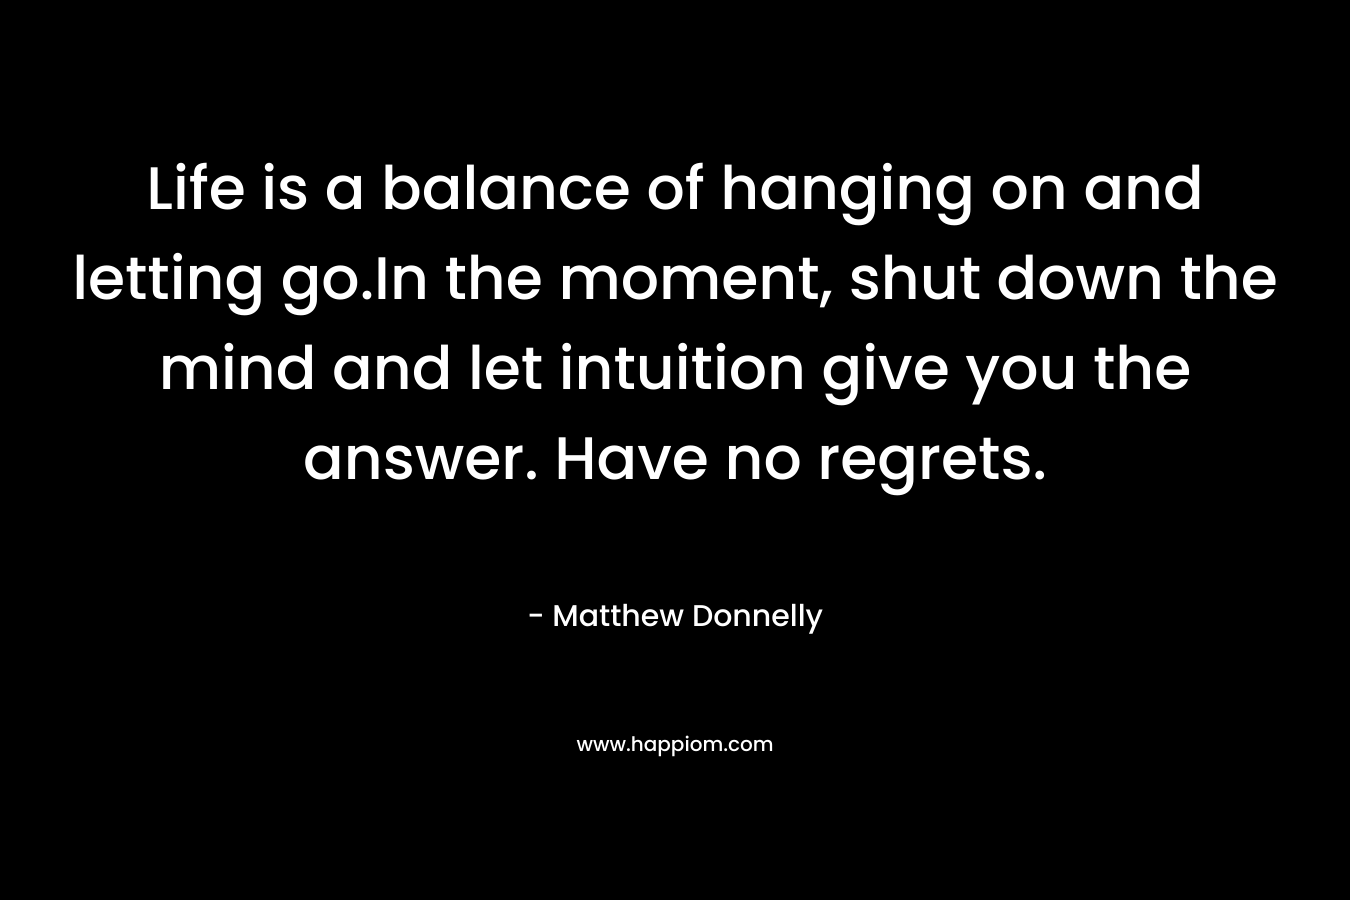 Life is a balance of hanging on and letting go.In the moment, shut down the mind and let intuition give you the answer. Have no regrets.